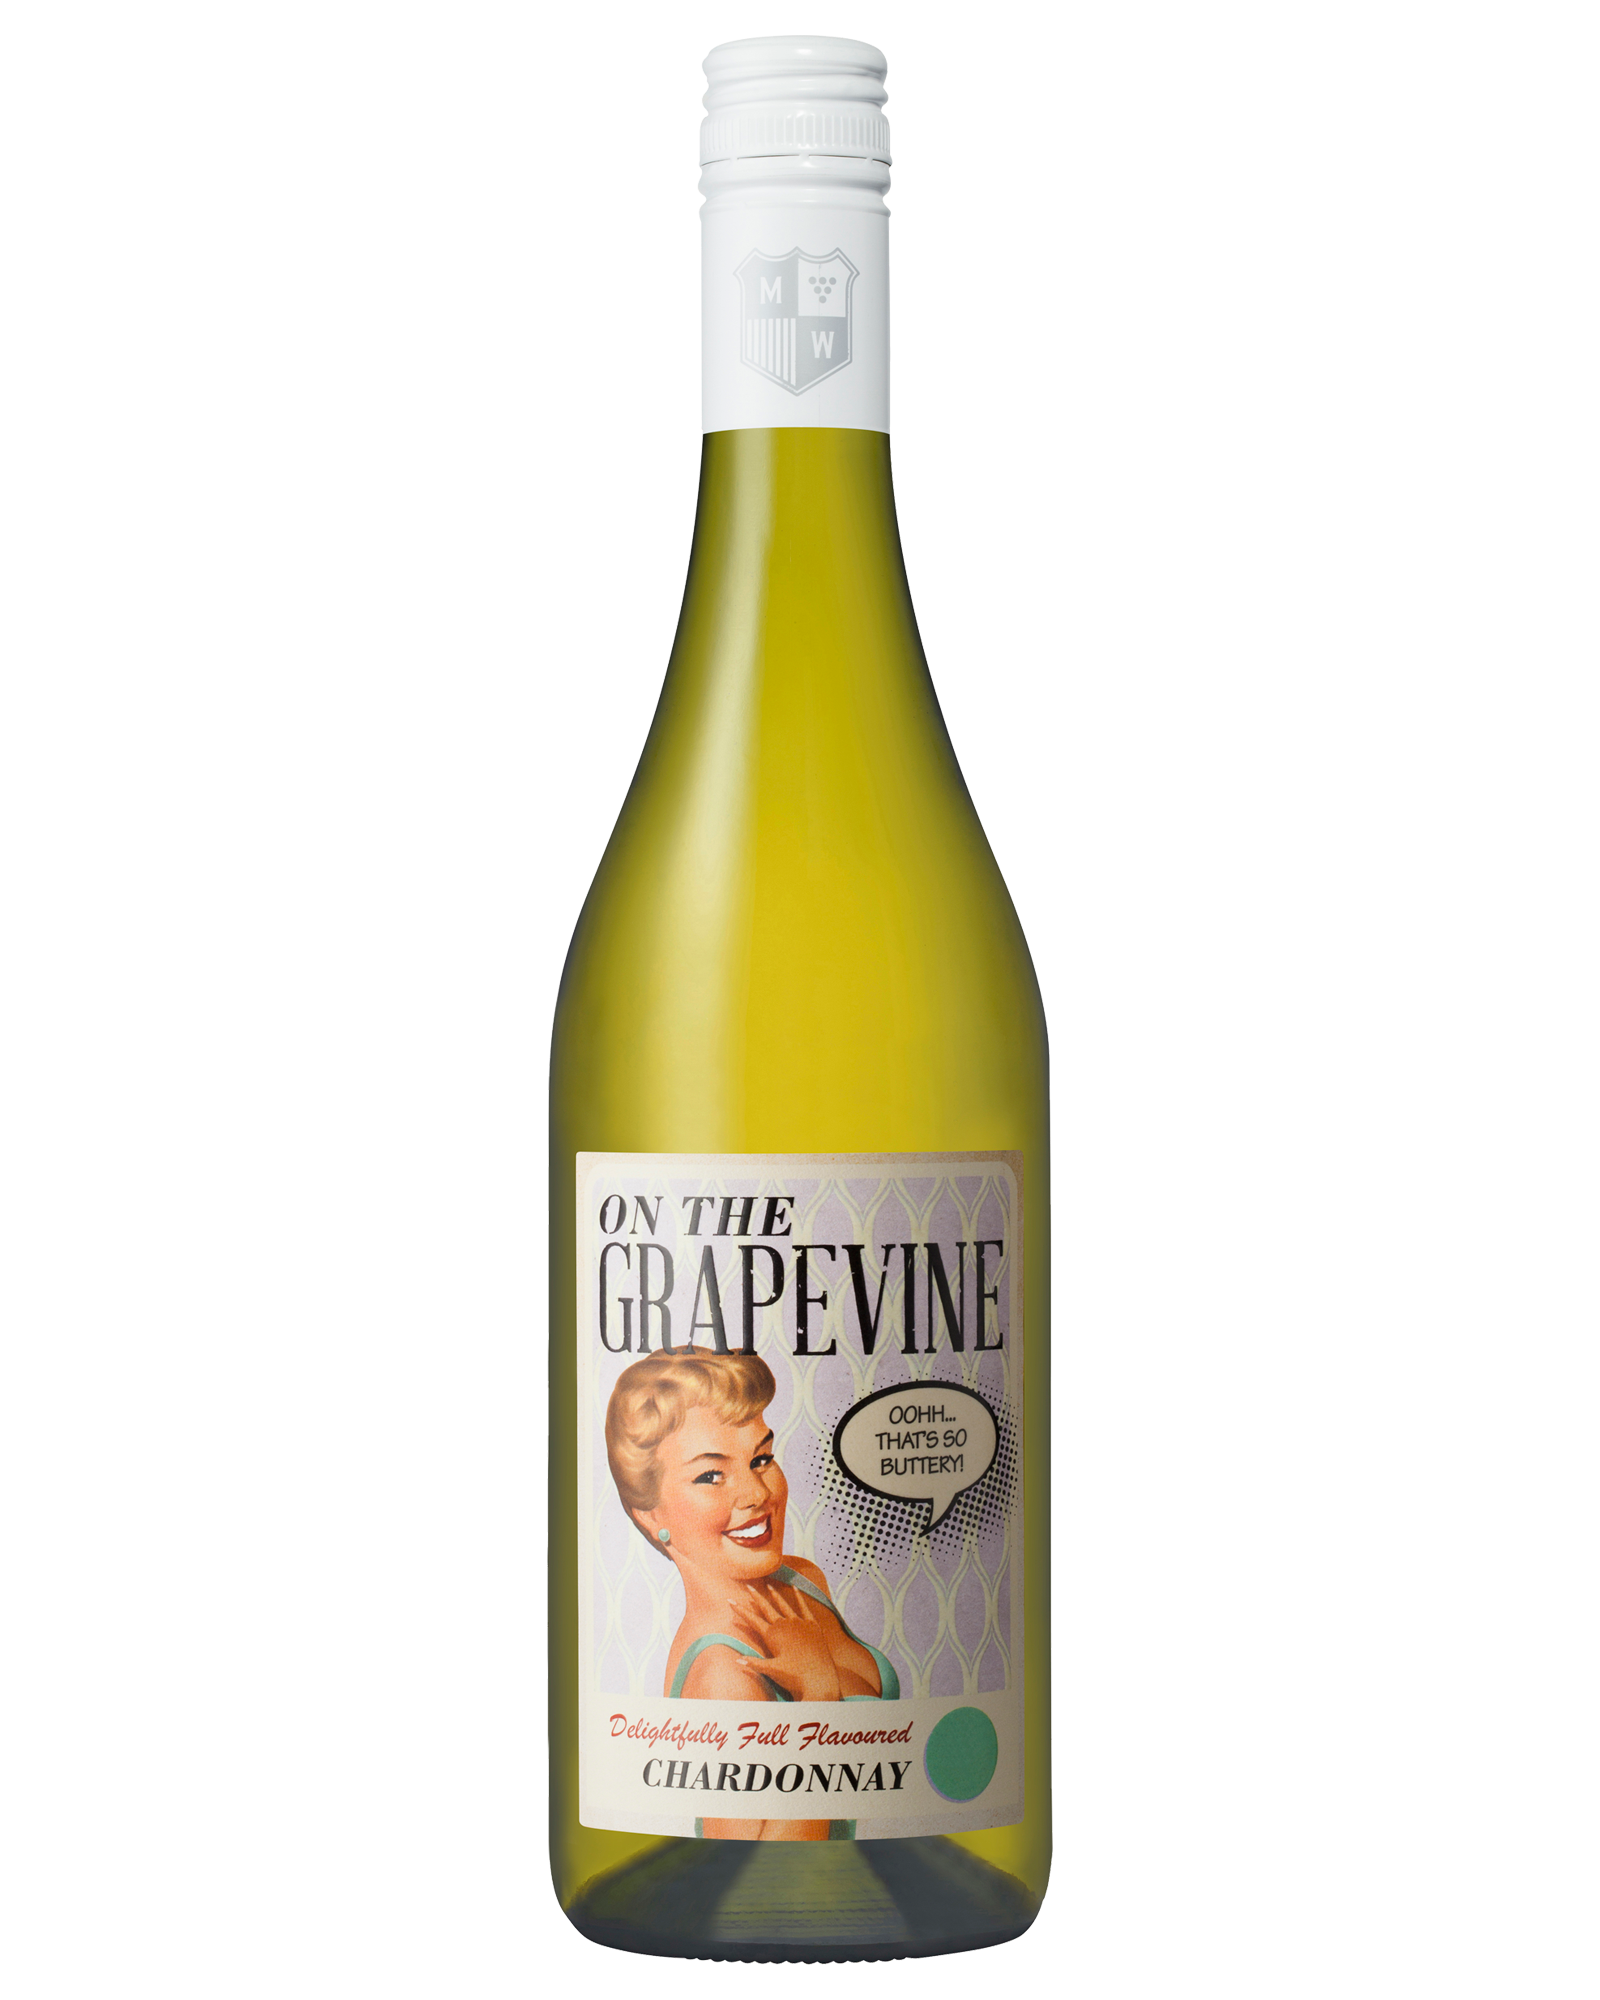 McWilliam’s On The Grapevine Chardonnay